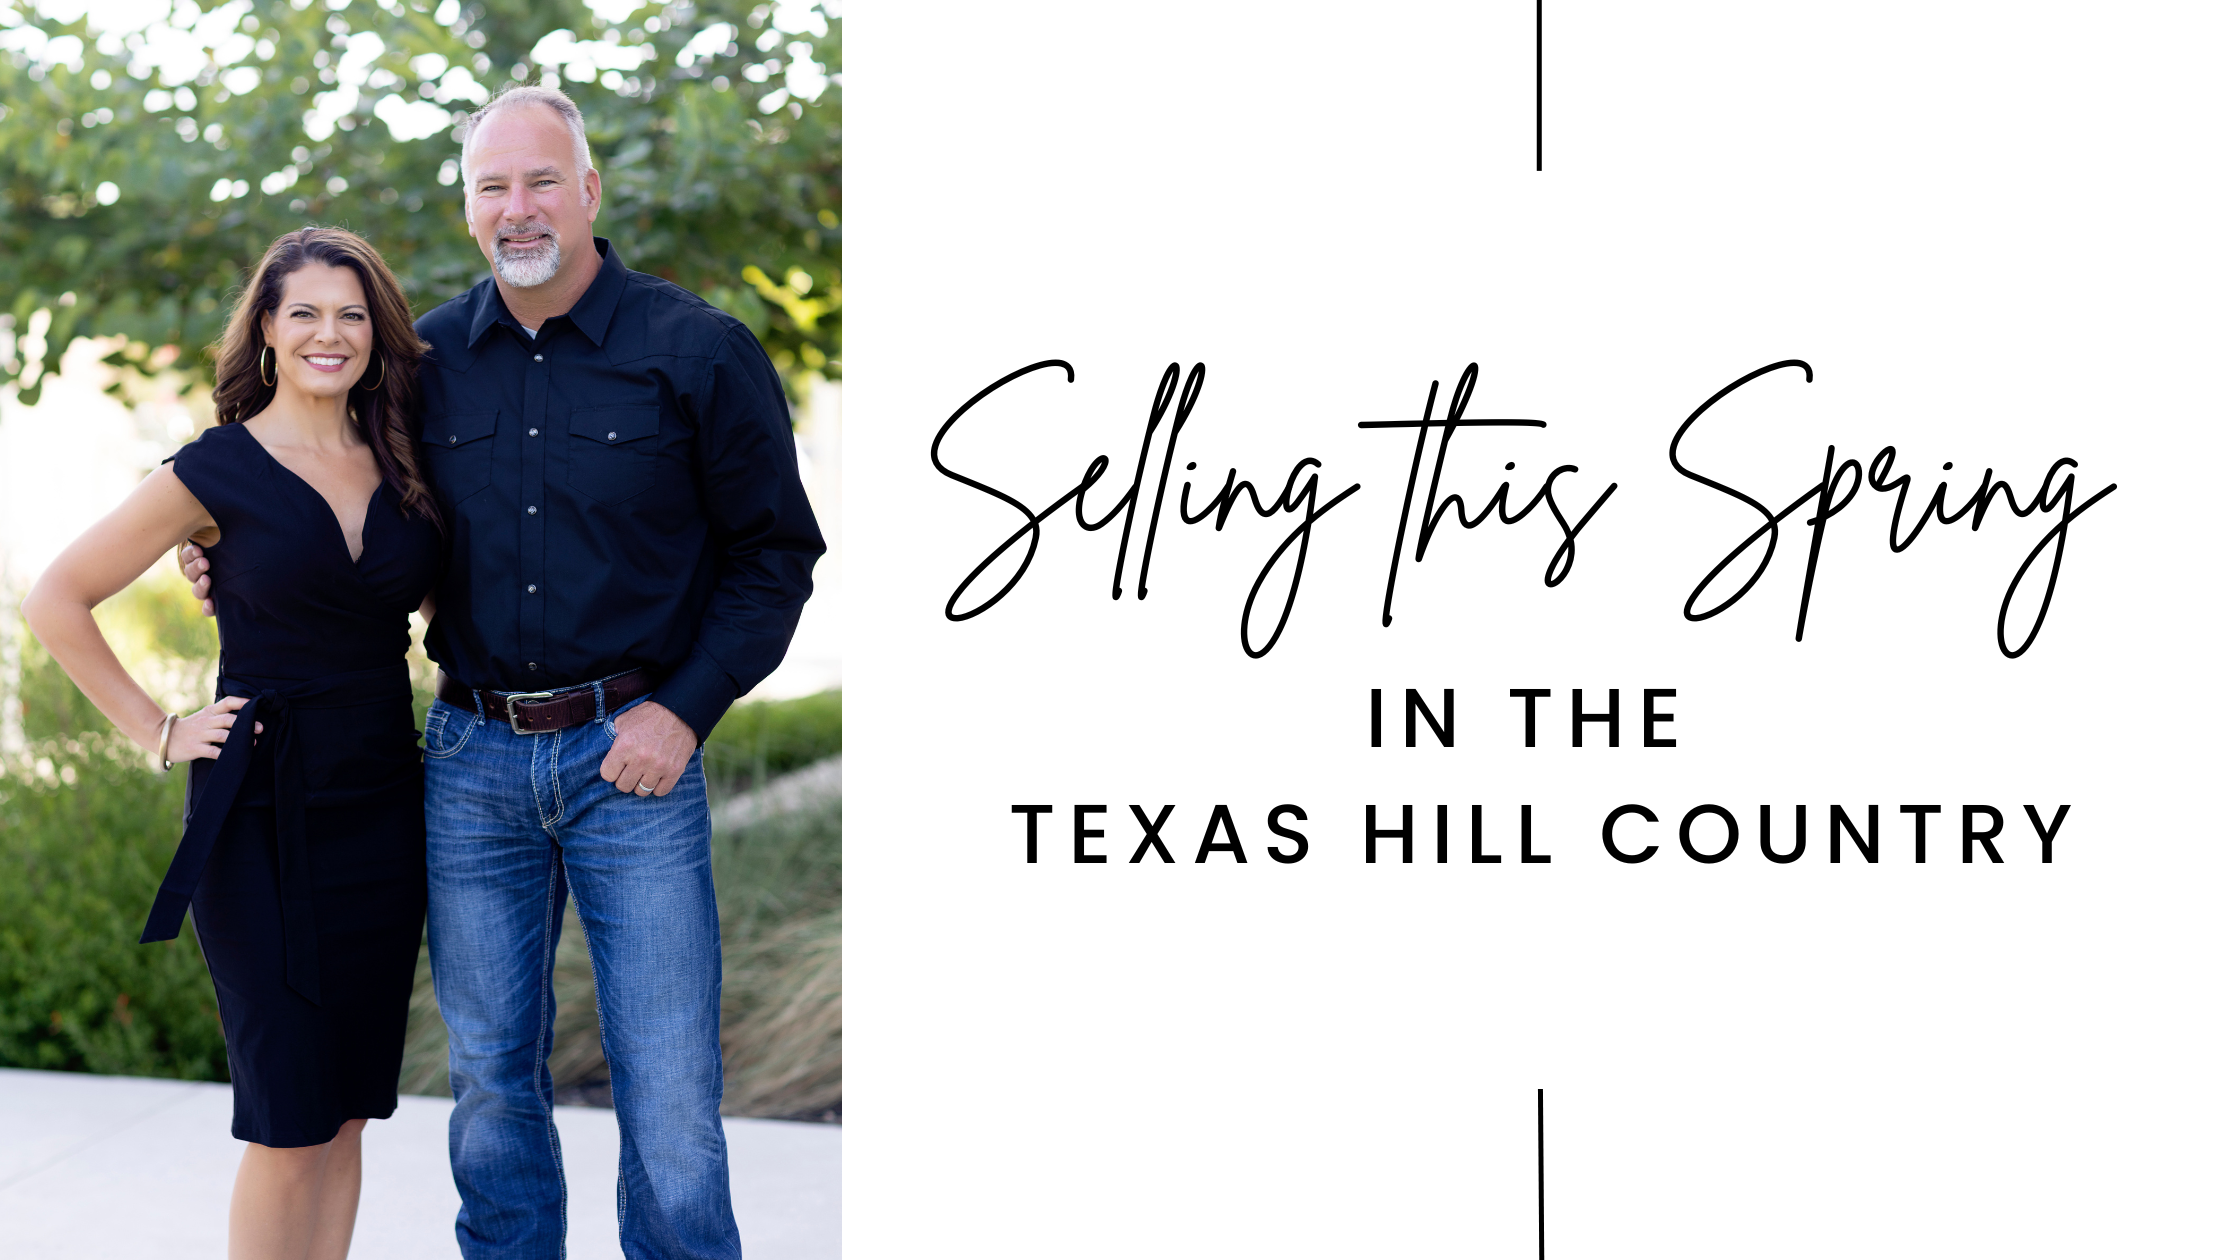 Selling your home this spring in the Texas Hill Country